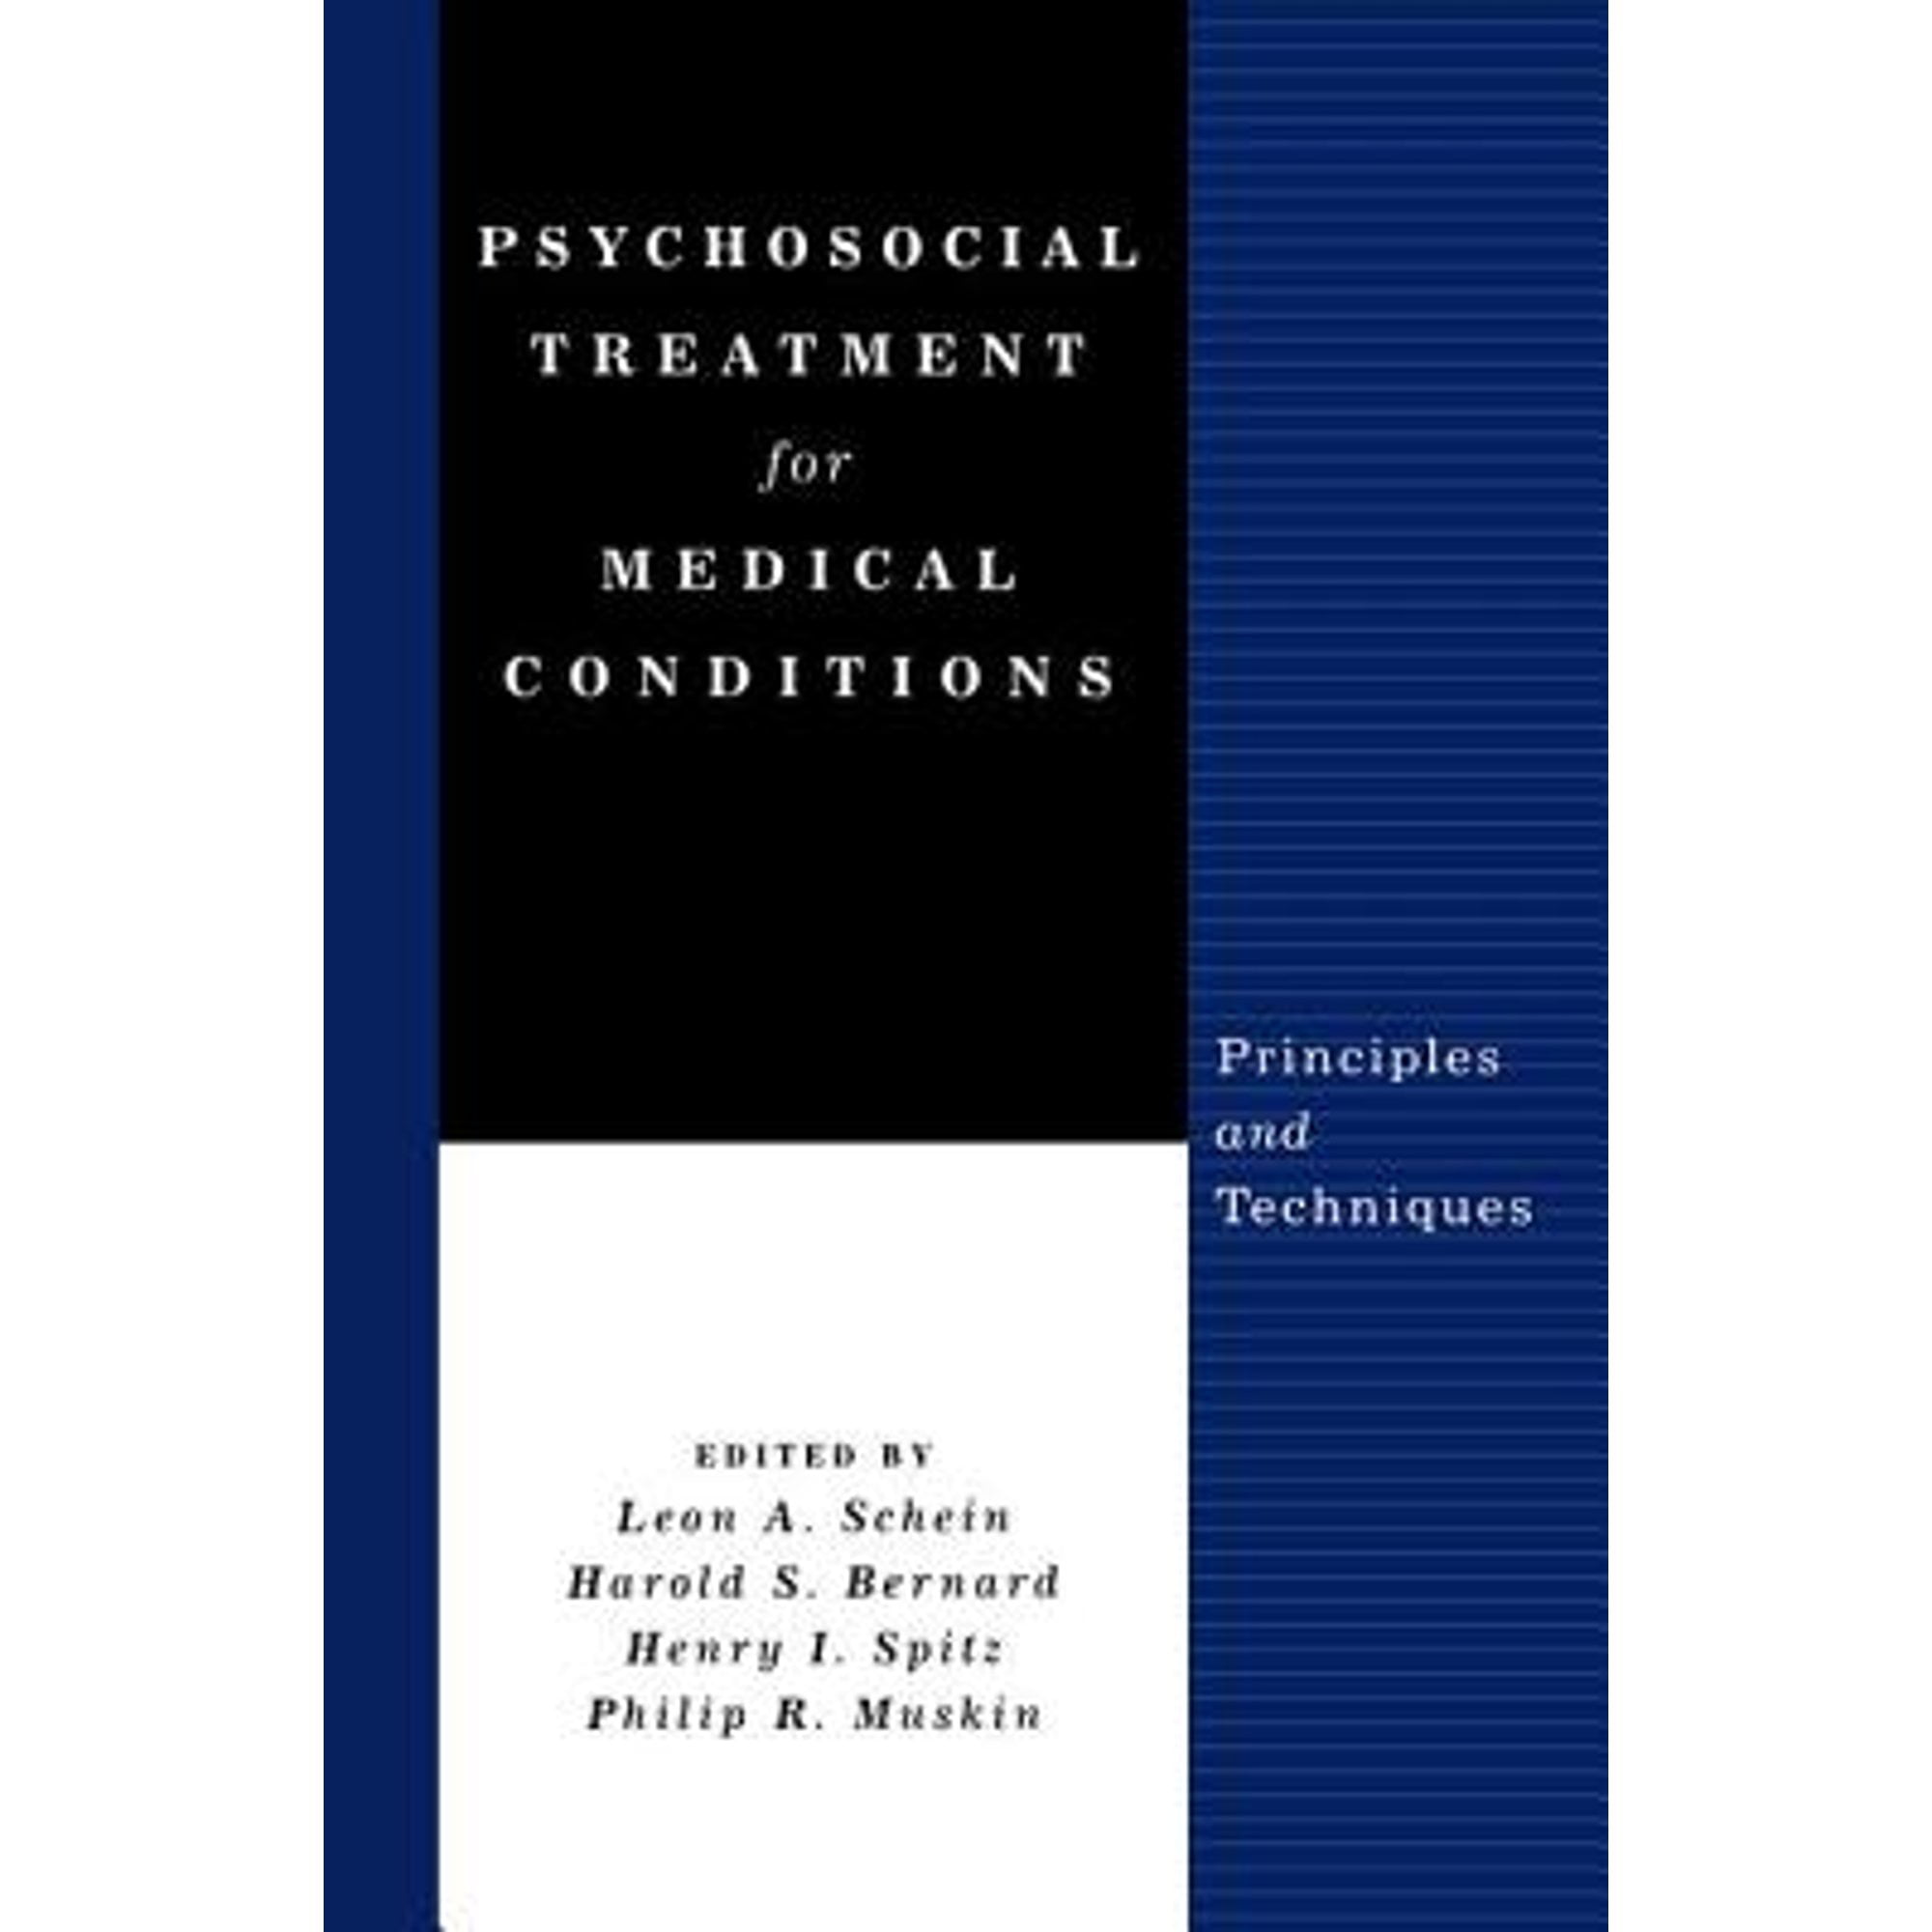 Pre-Owned Psychosocial Treatment for Medical Conditions: Principles and Techniques (Hardcover) by Leon A Schein, Harold S Bernard, Henry I Spitz